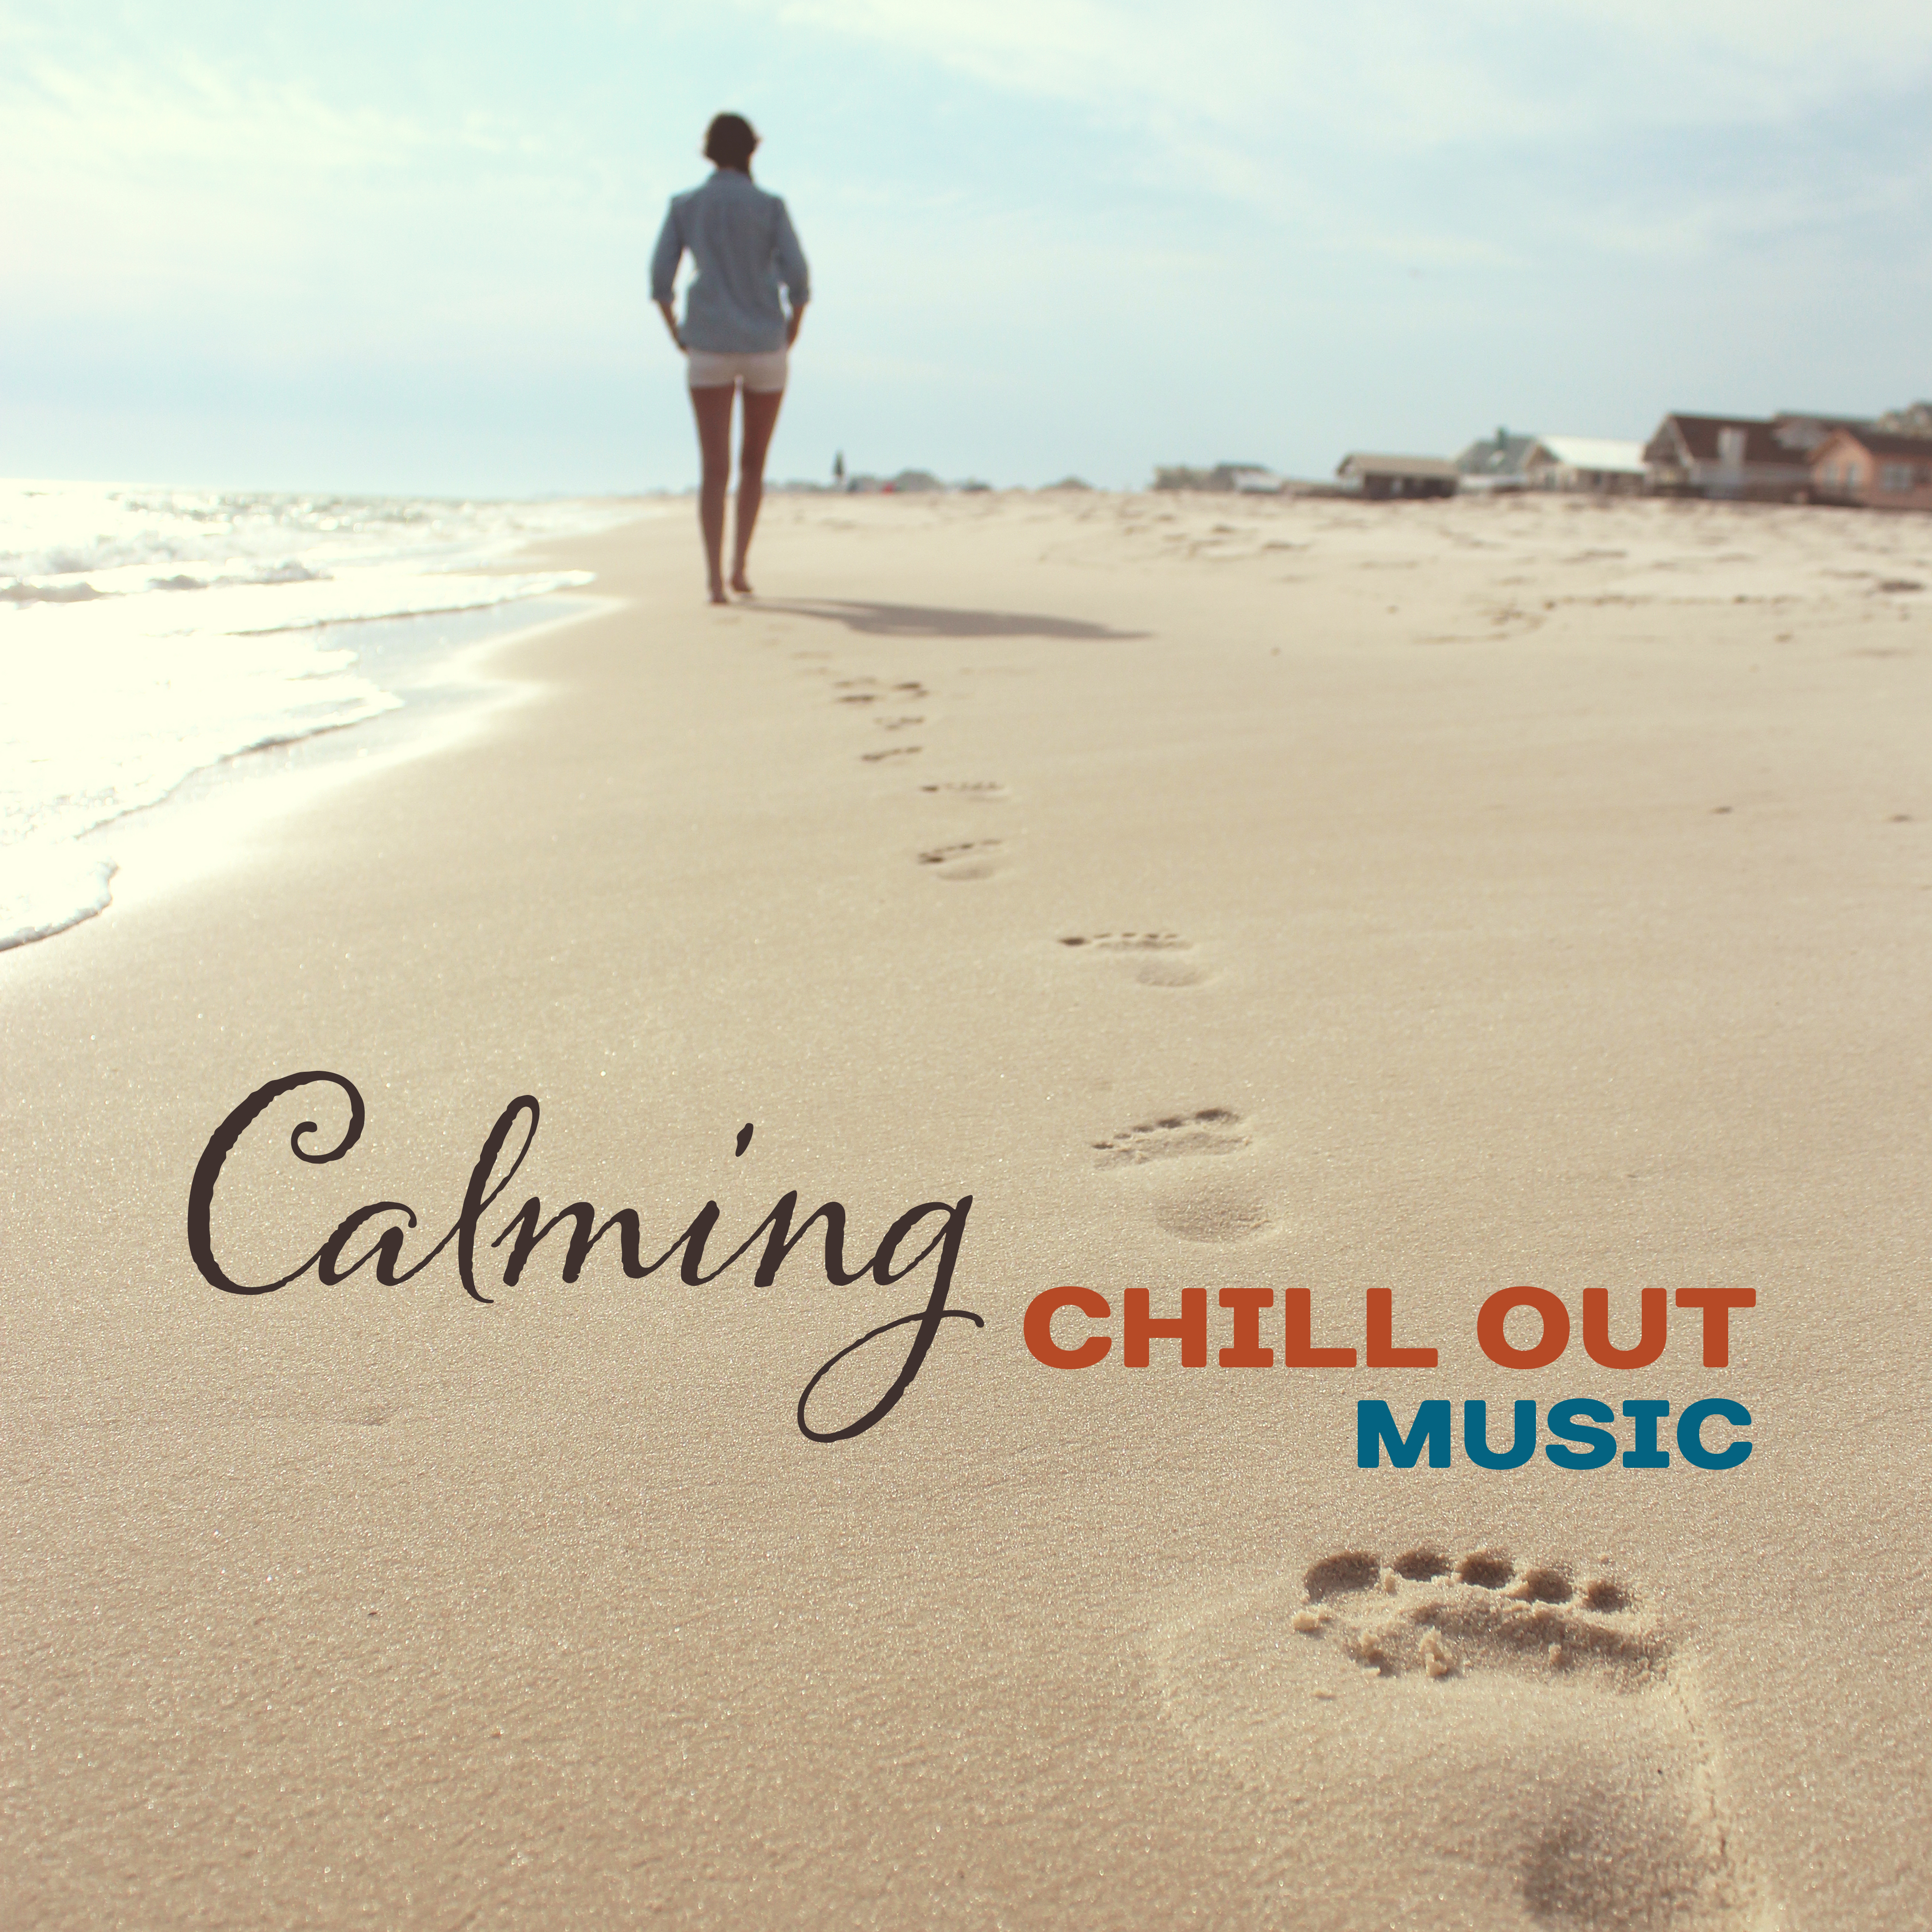 Calming Chill Out Music  Chill Out Sounds to Relax, Ibiza Calmness, Beach Lounge, Sun Summer Music